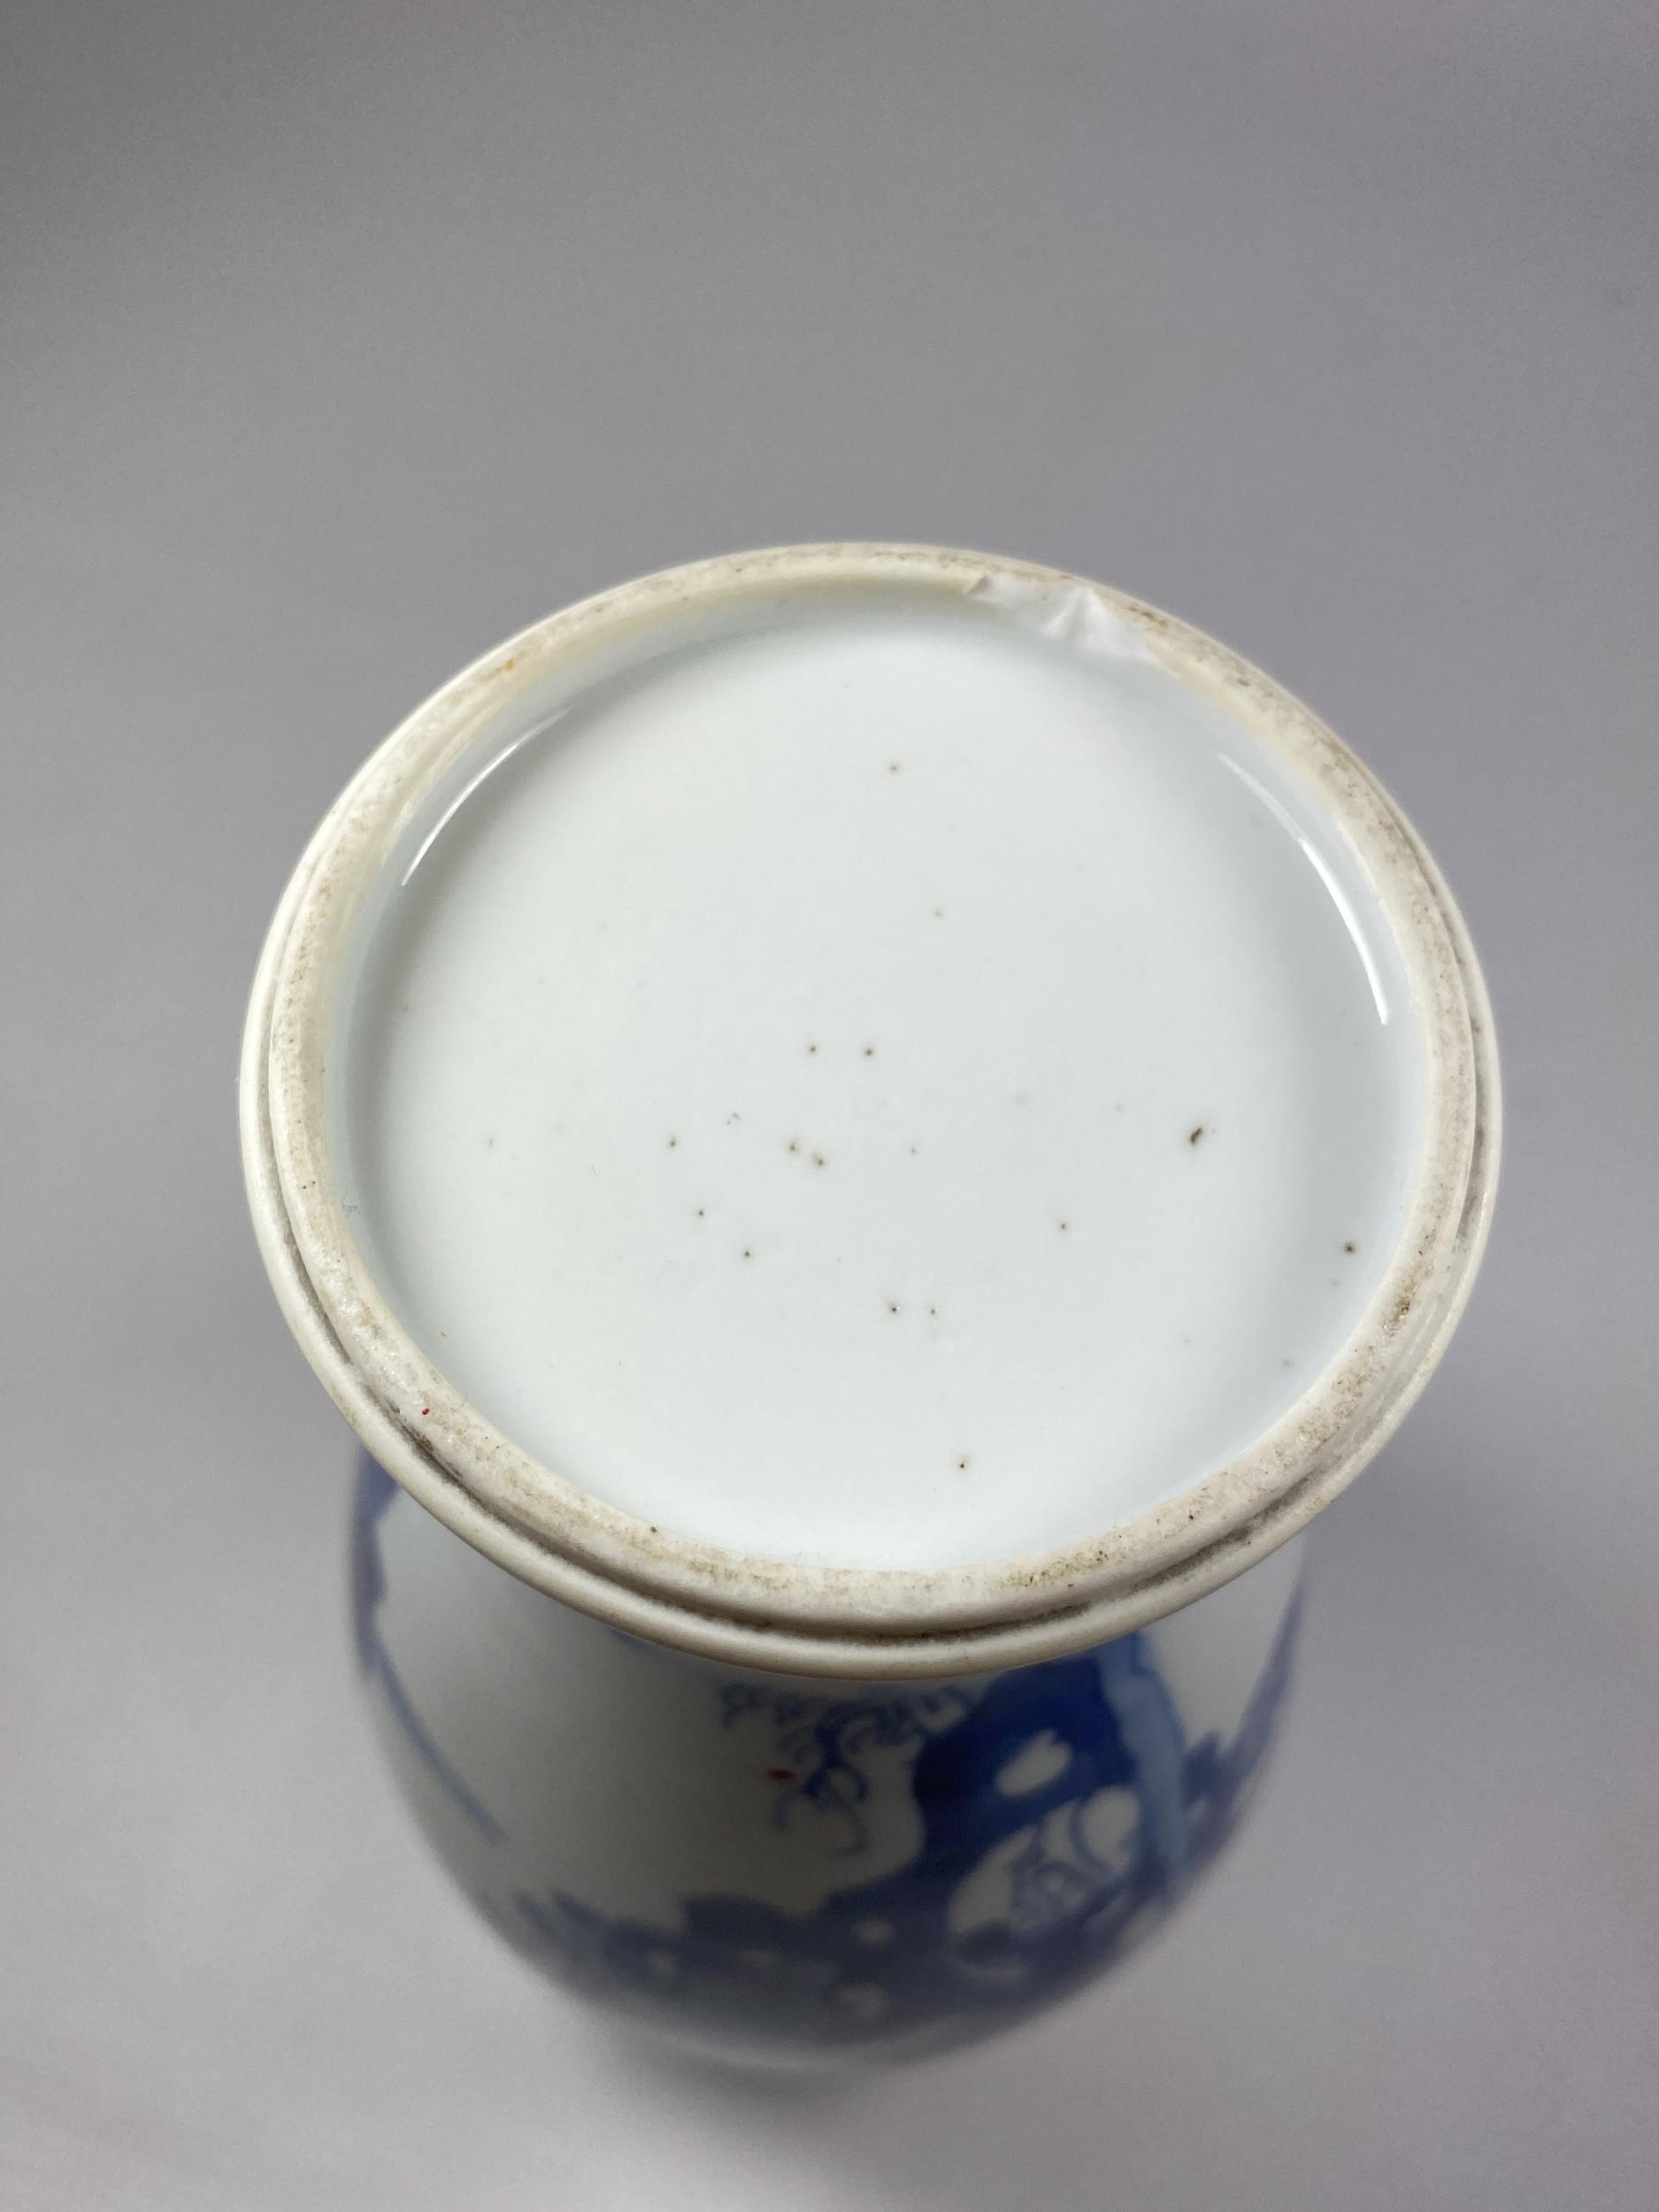 A CHINESE KANGXI PERIOD (1661-1722) BLUE AND WHITE PORCELAIN BALUSTER FORM VASE DEPICTING FIGURES IN - Image 5 of 7